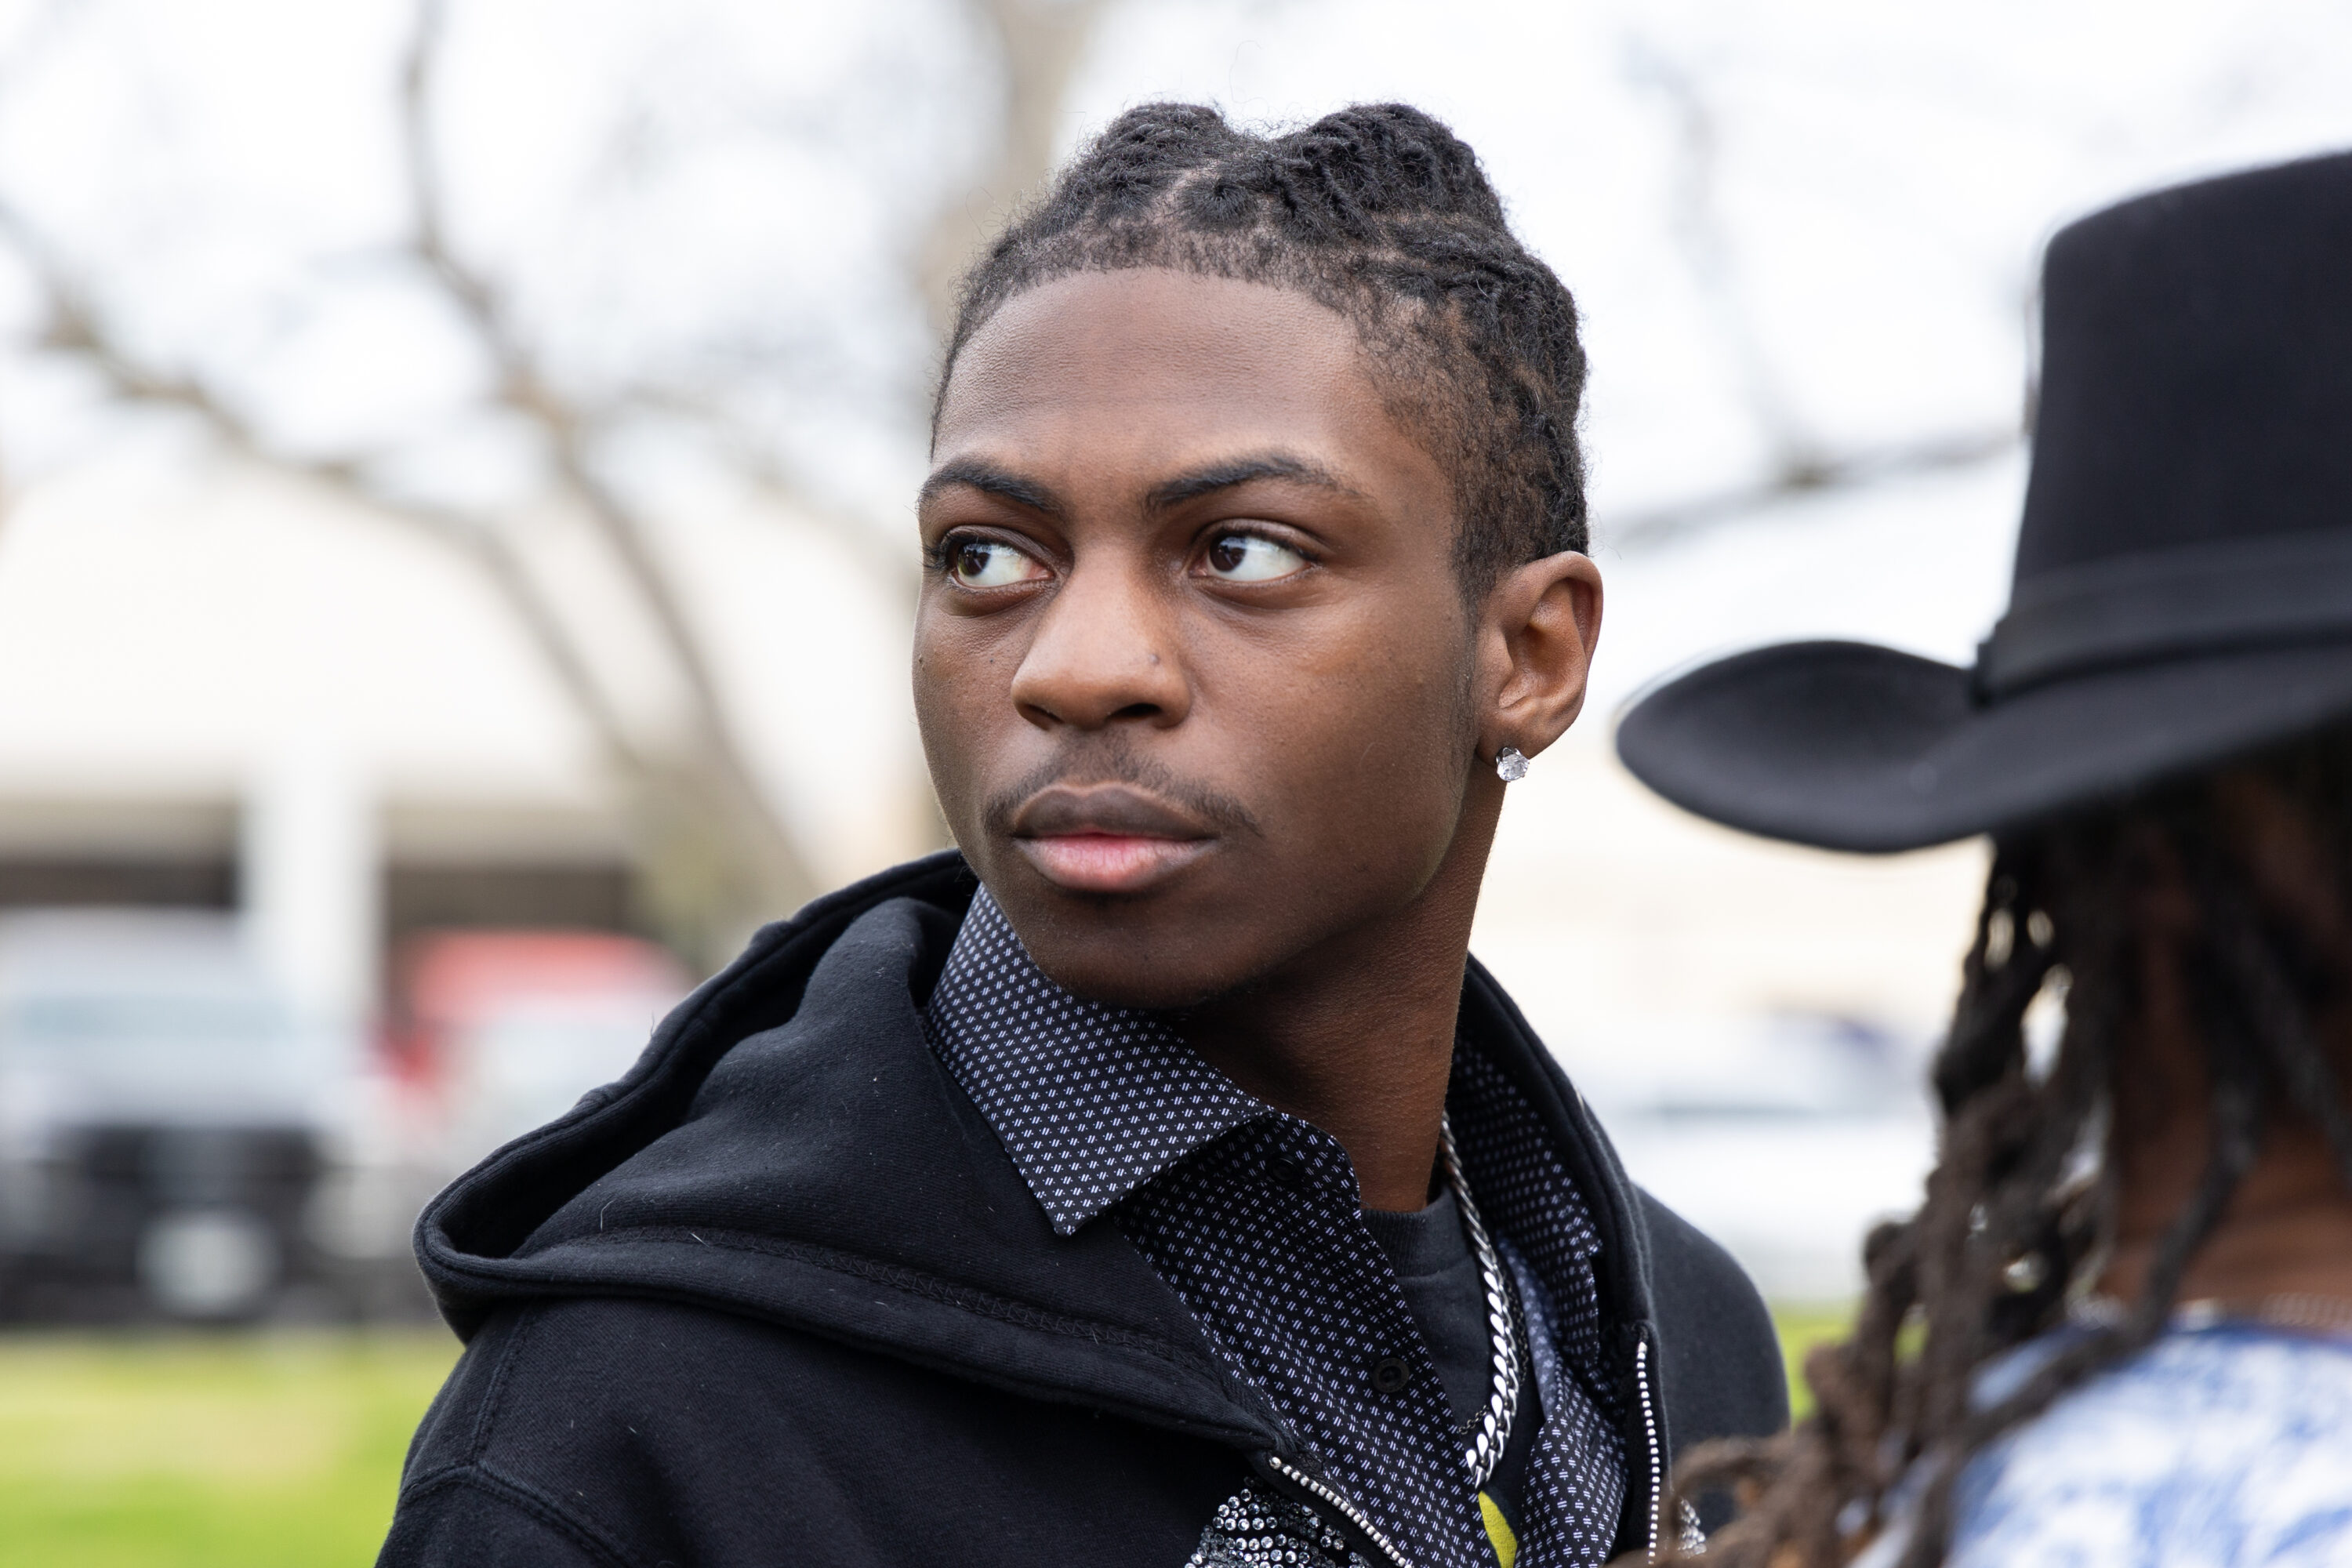 Black Student Darryl George Is Suspended Over Locs Again - The New York  Times